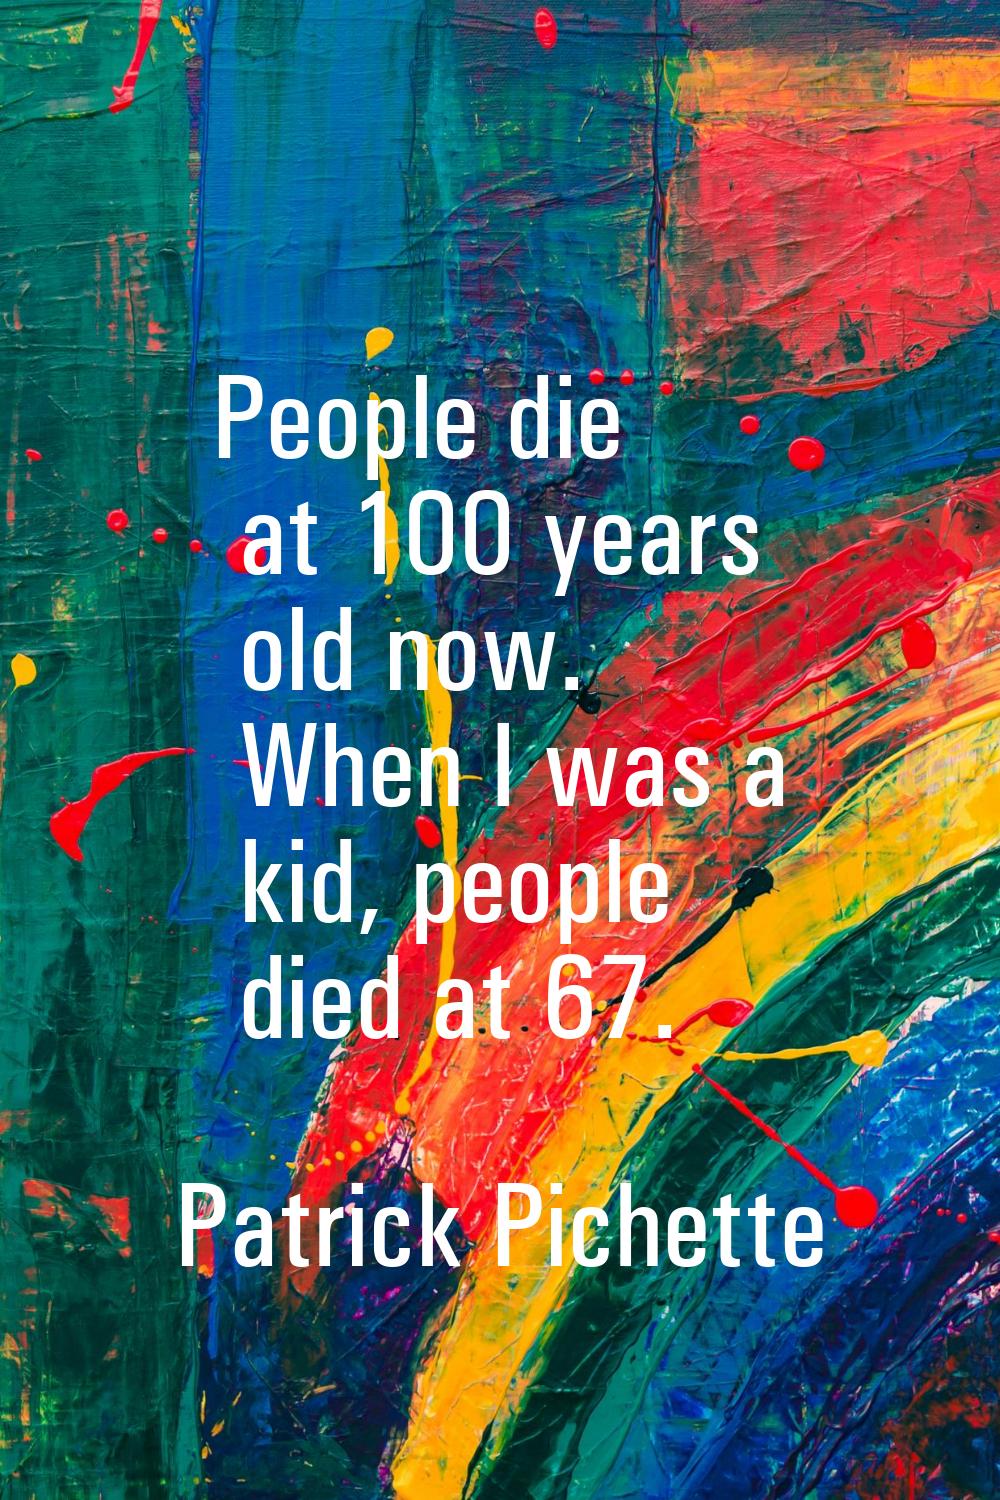 People die at 100 years old now. When I was a kid, people died at 67.